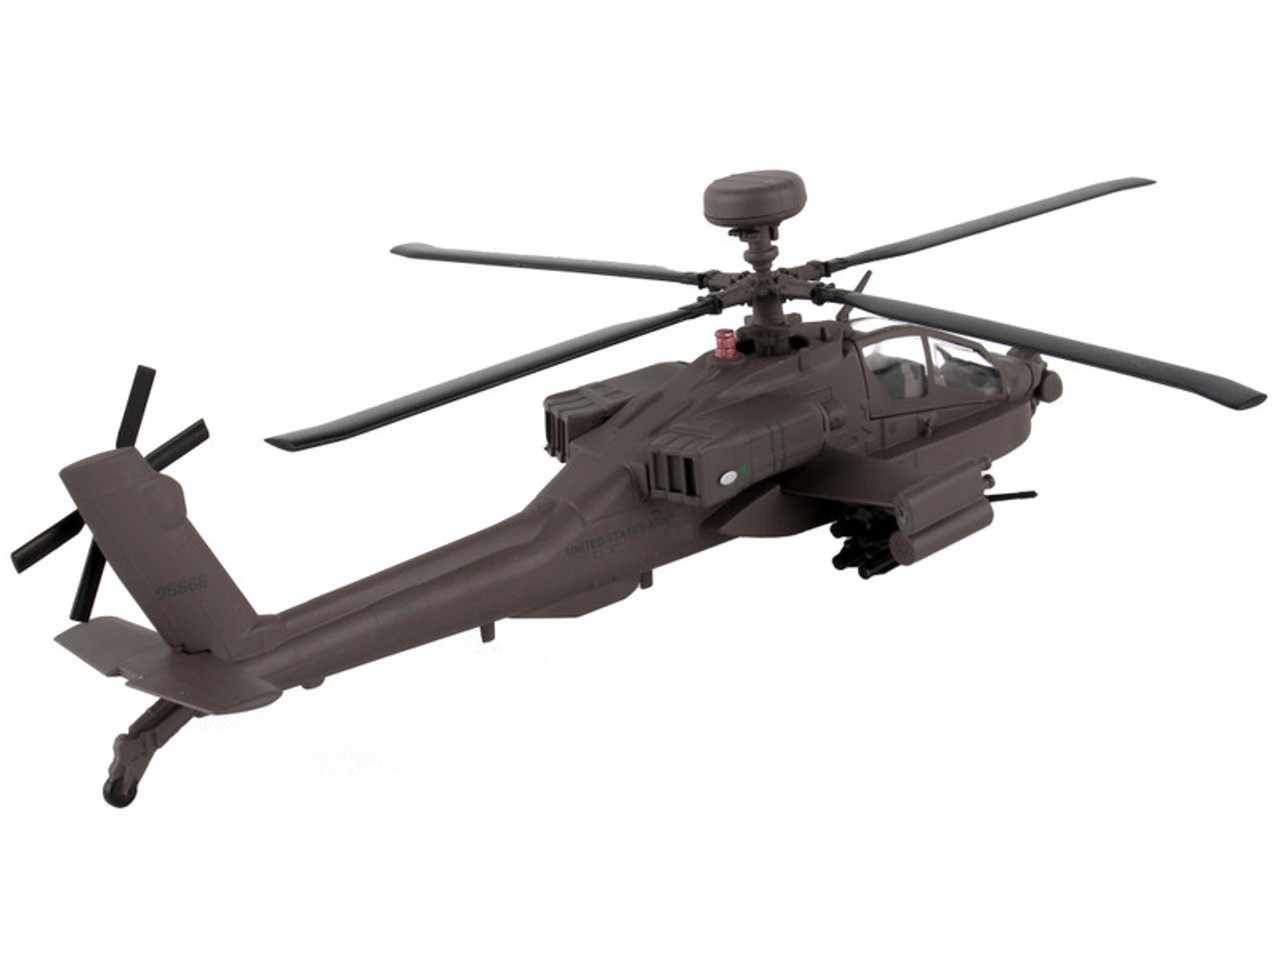 Boeing AH-64D Apache Longbow Helicopter "United States Army" 1/100 Diecast Model by Postage Stamp